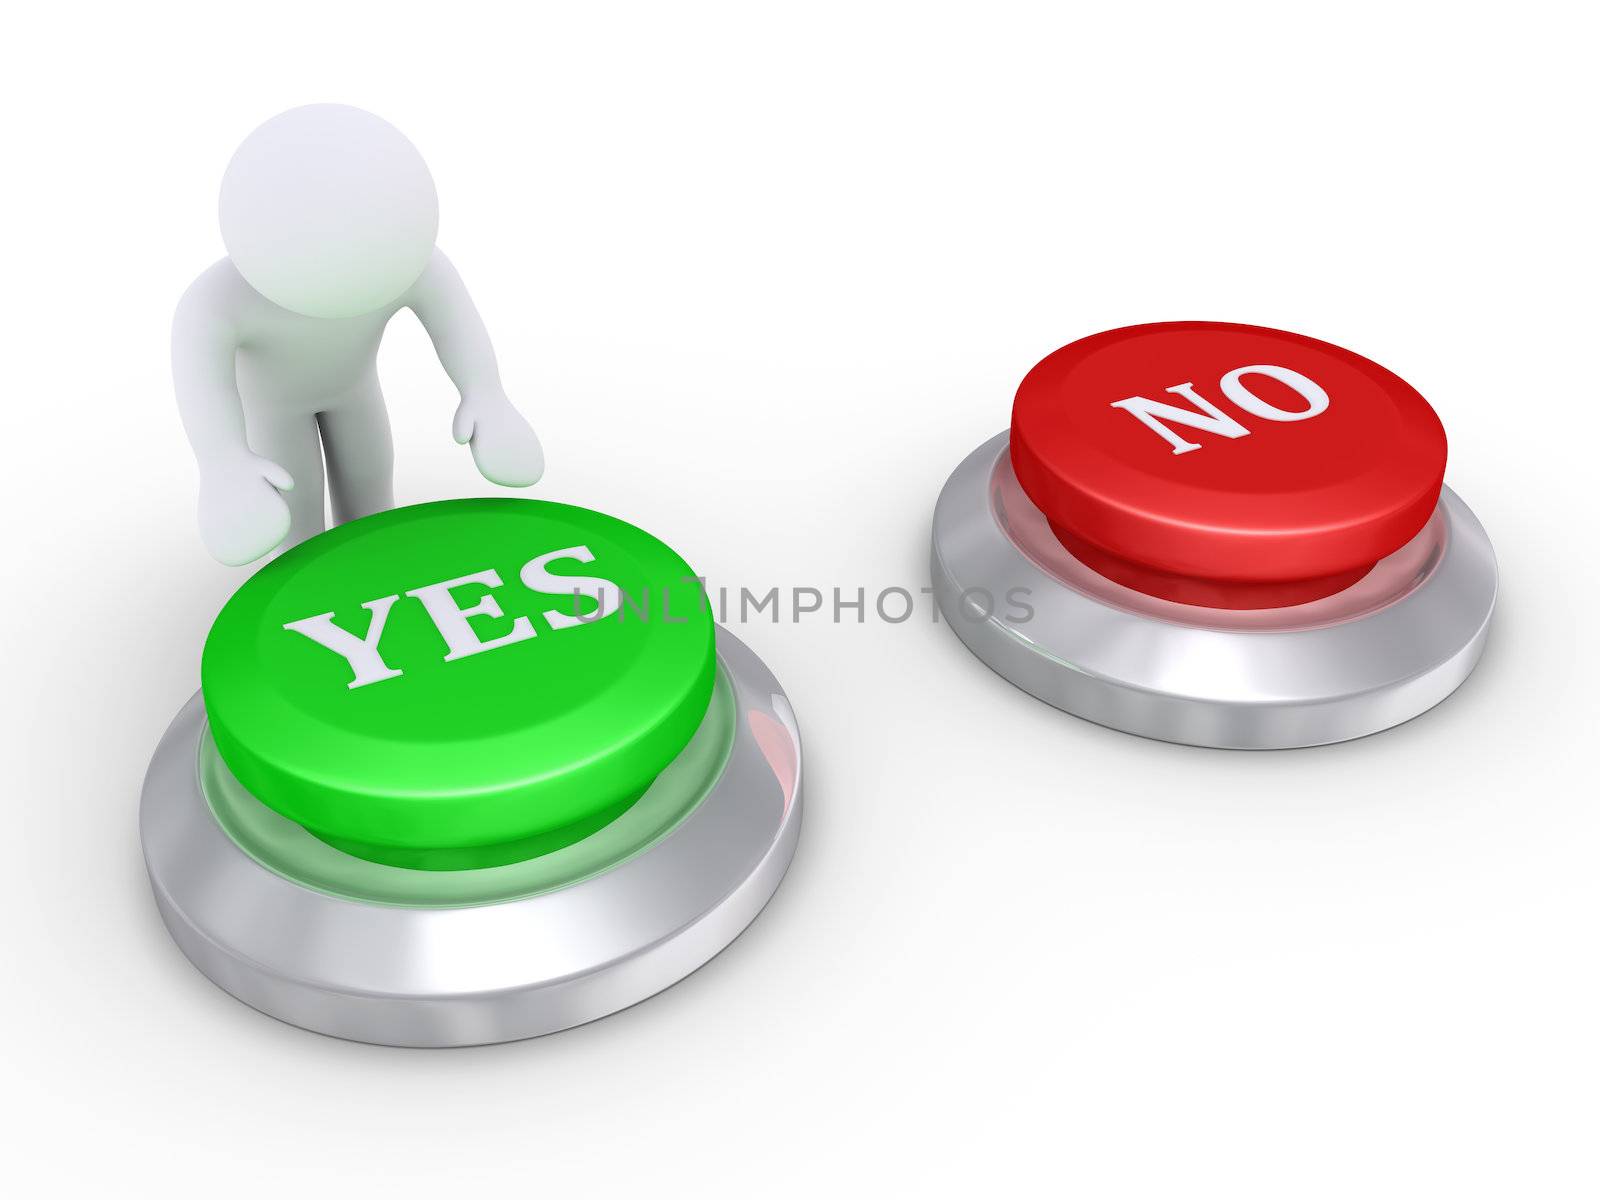 3d person is about to press the Yes button rather than the No button